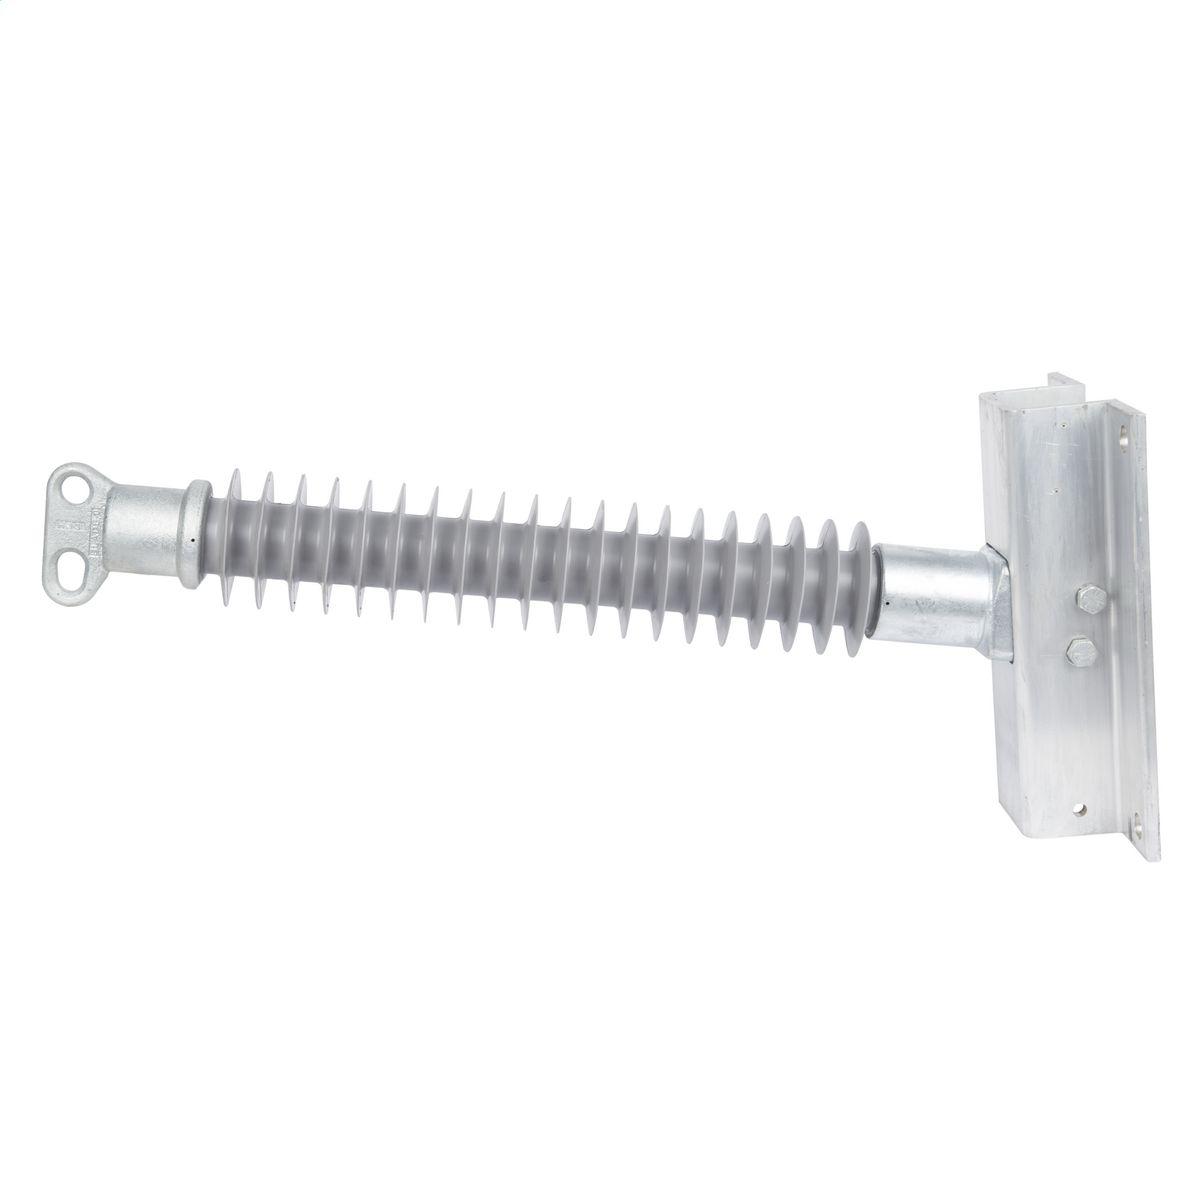 Hubbell P300057S0080 3.0" Line Post, 2 hole blade, Steel Flat base 9x13 7/8" bolts  ; Made from hydrophobic silicone polymer ; 